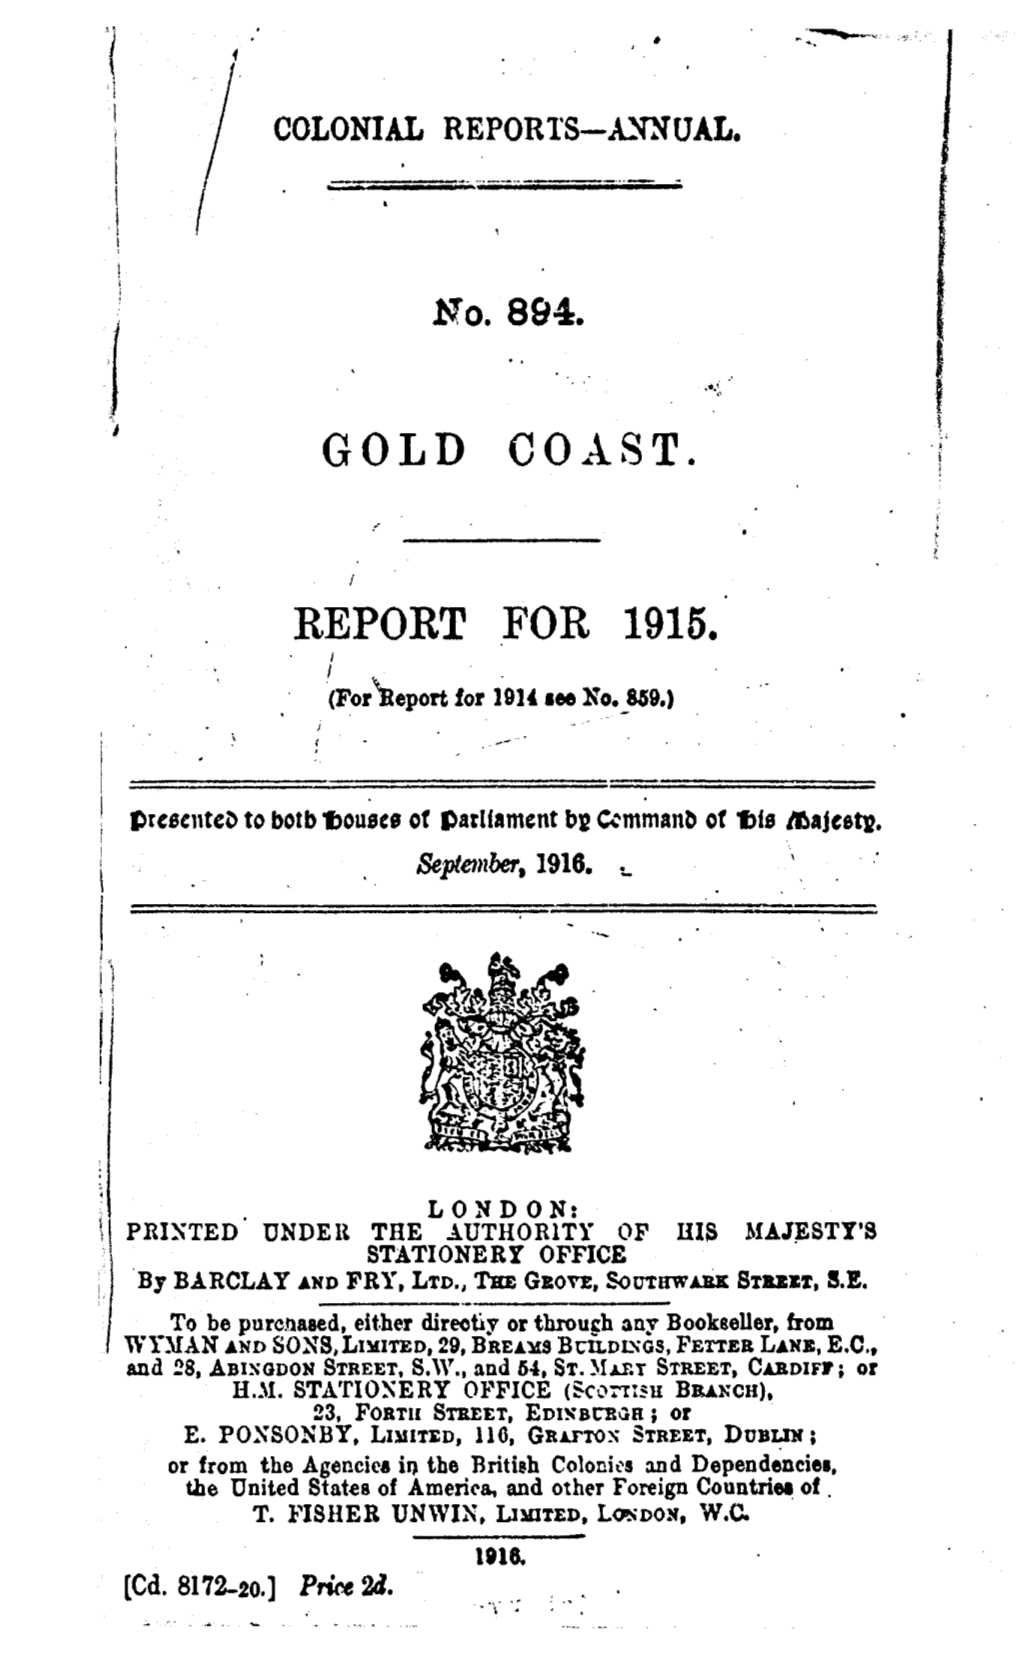 Annual Reports of the Colonies, Gold Coast, 1915